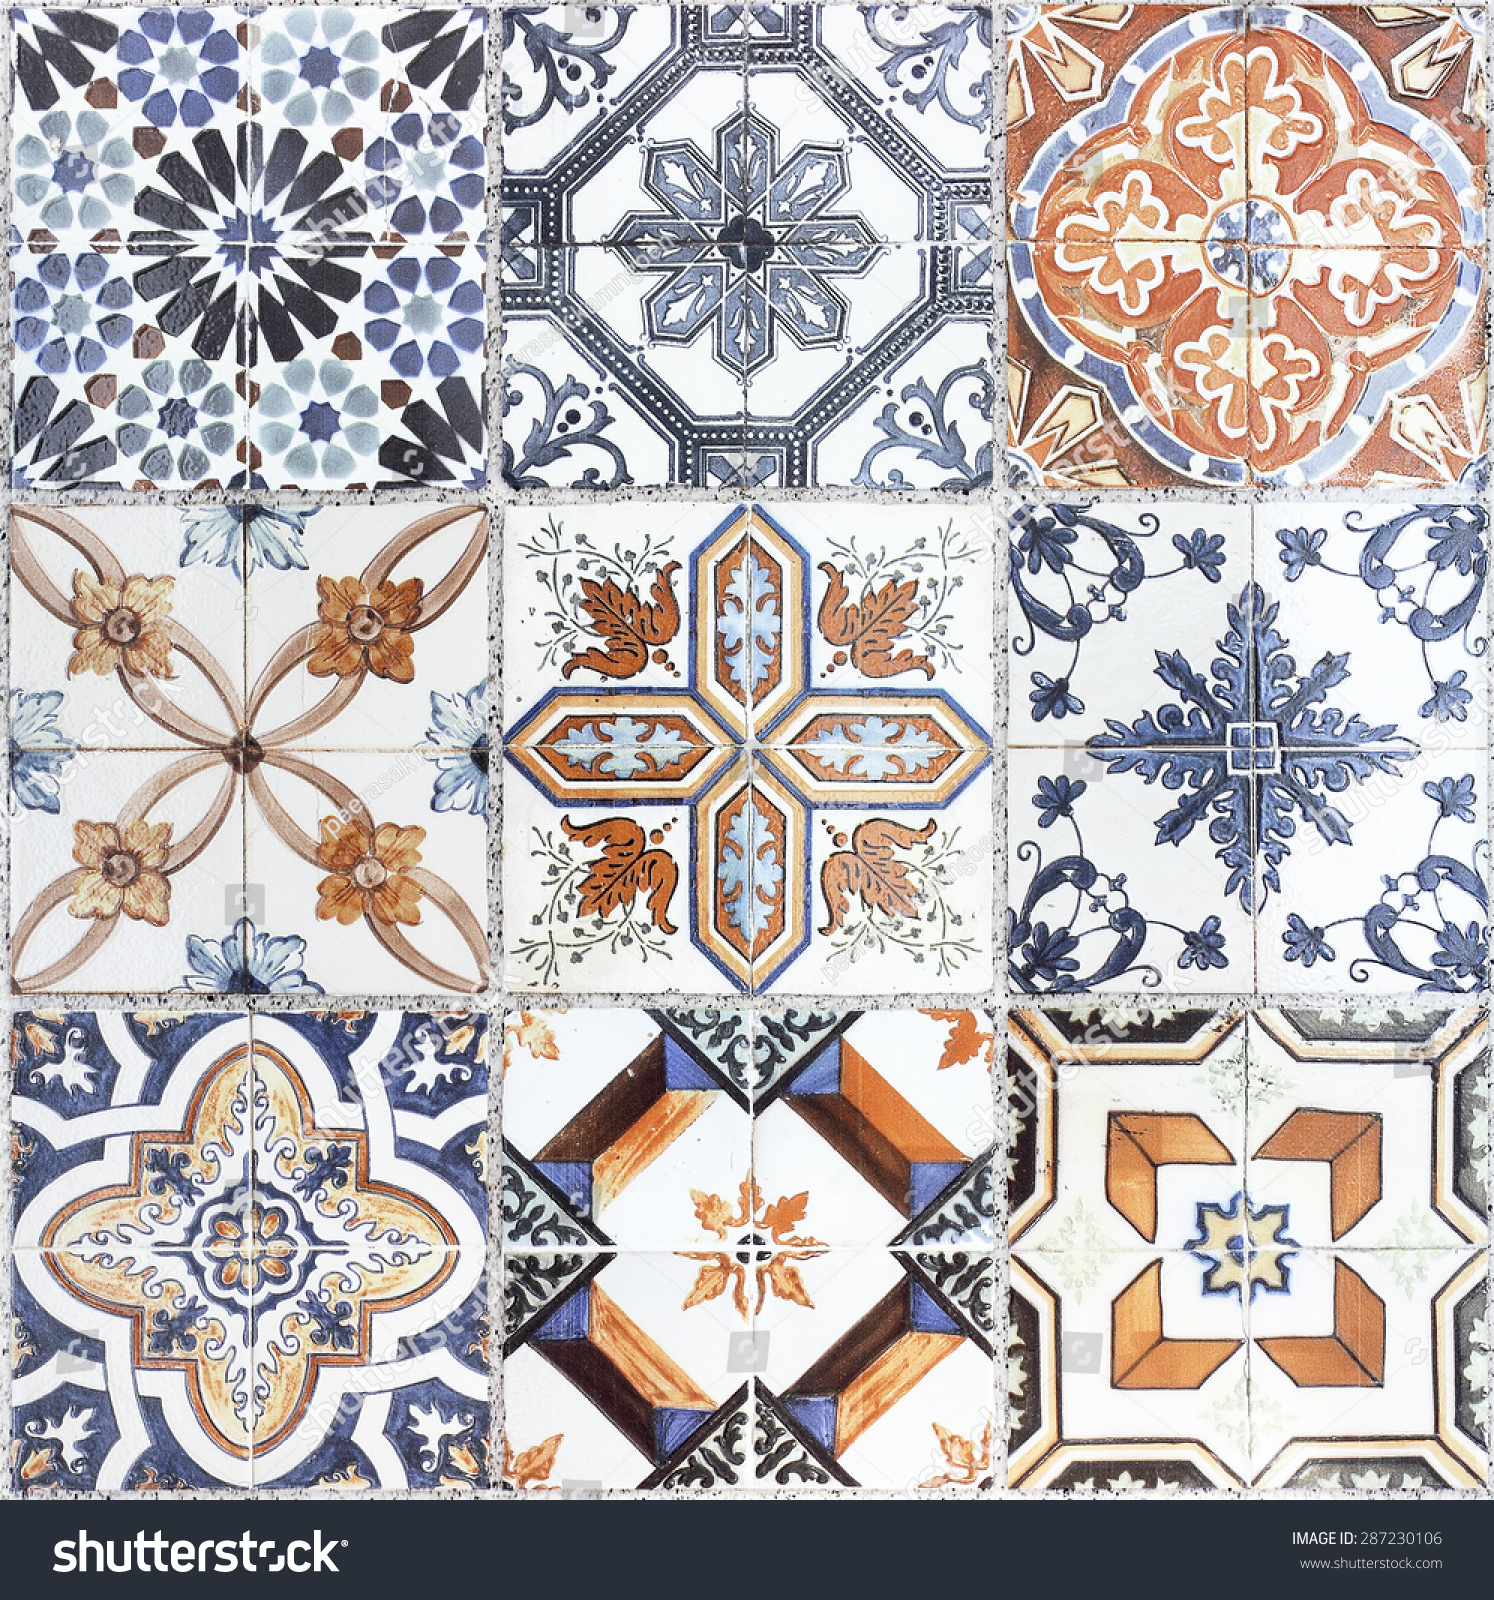 Beautiful Old Wall Ceramic Tiles Patterns Handcraft From Thailand